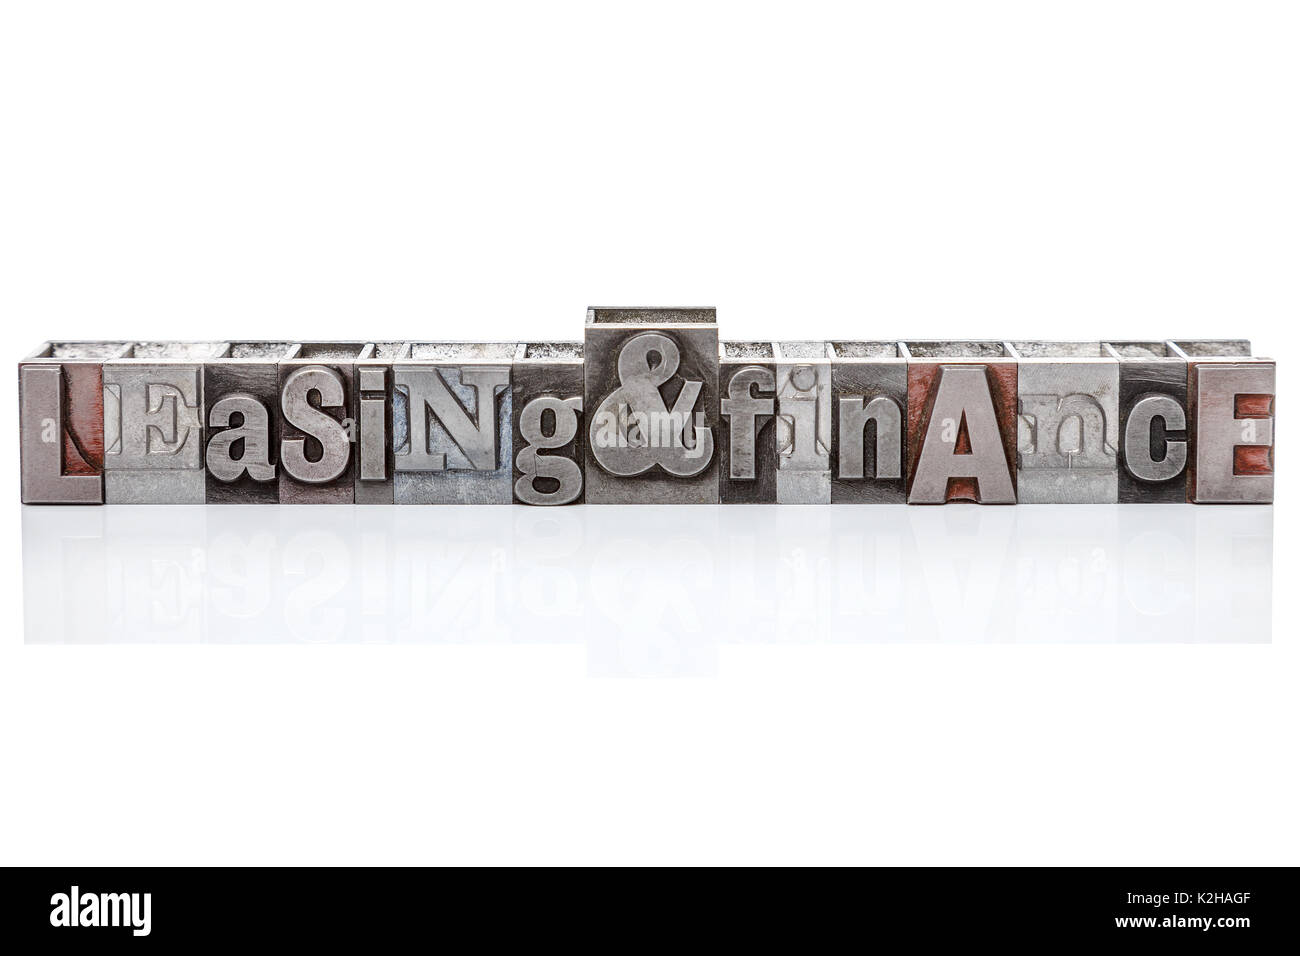 The words Leasing and Finance made from old metal letterpress typeset, isolated on a white background with reflection. Stock Photo